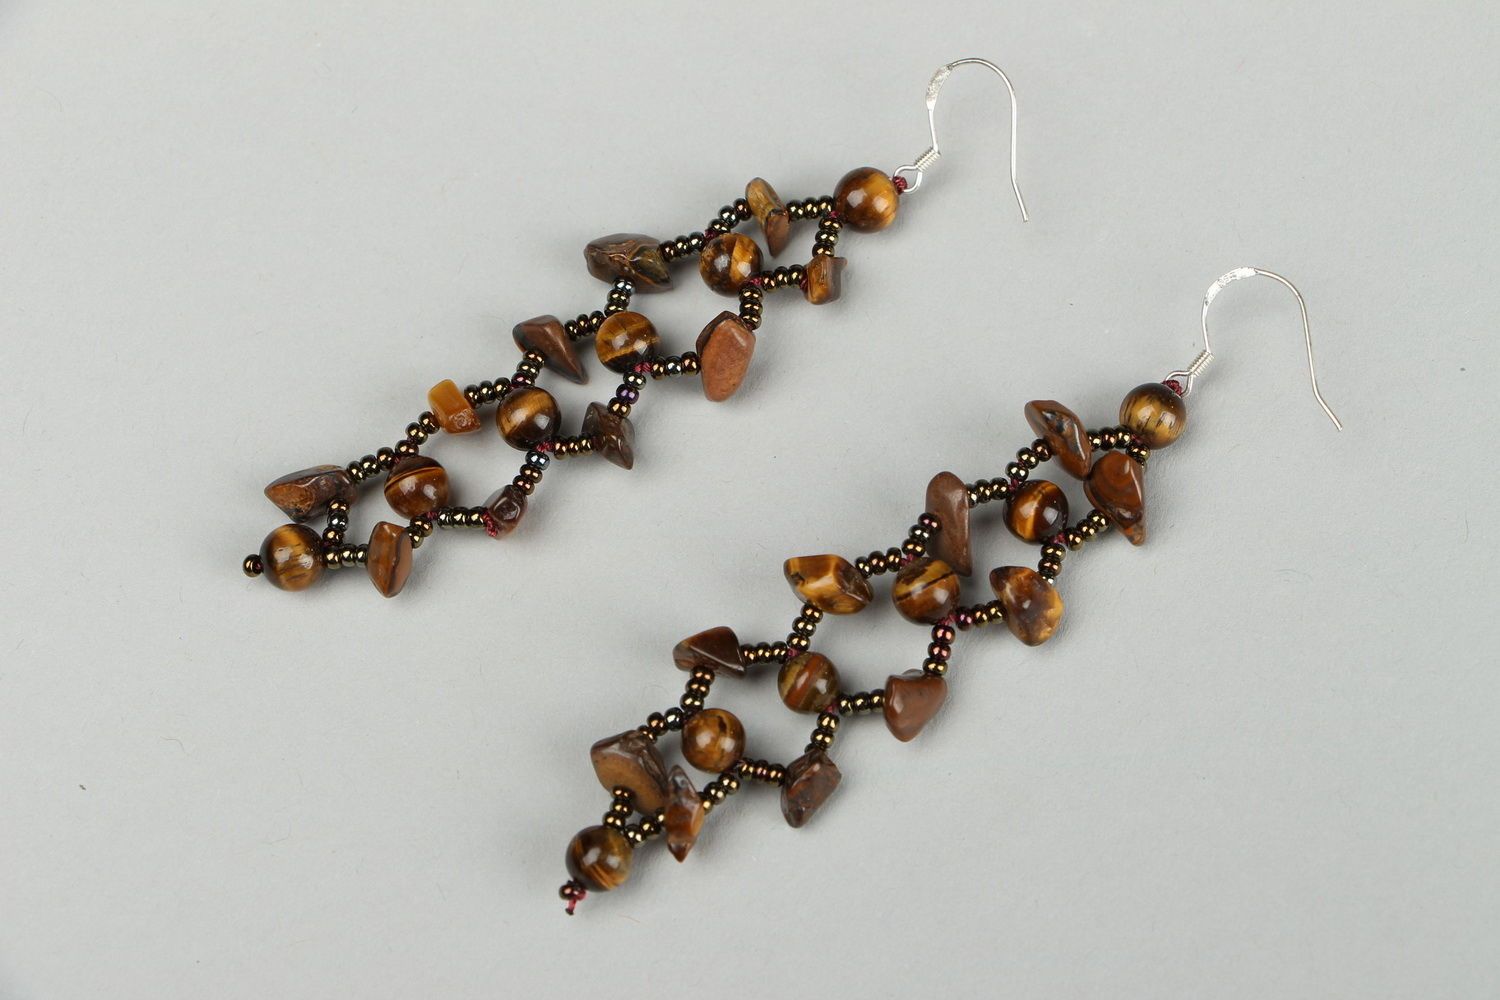 Pendent earrings made of Czech beads with tiger's eye stone photo 1